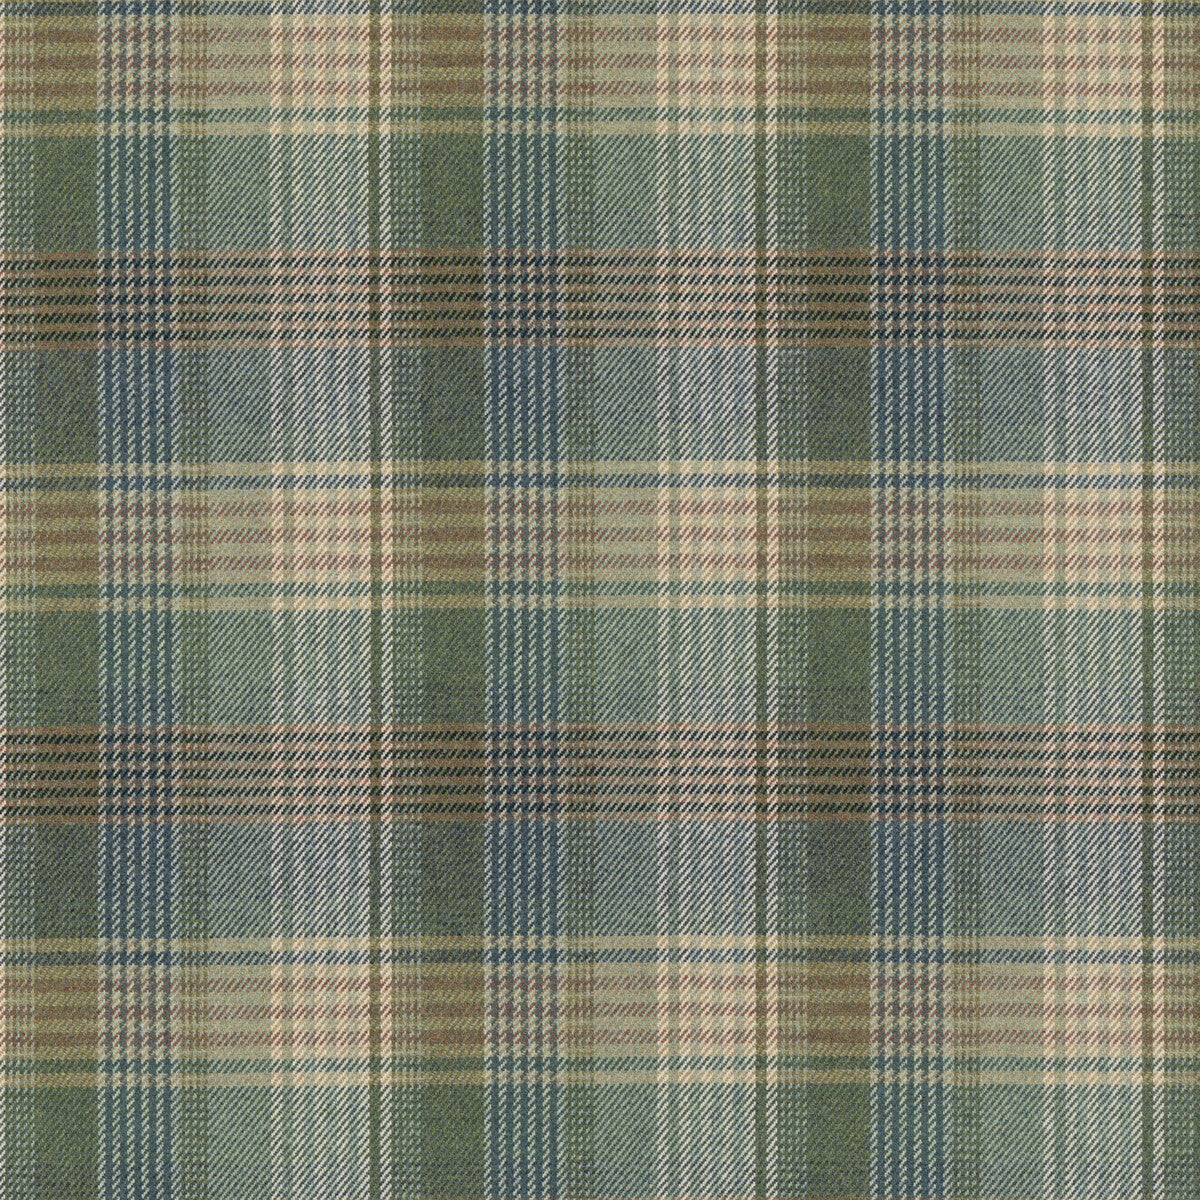 Braemar fabric in teal color - pattern FD803.R11.0 - by Mulberry in the Mulberry Wools IV collection